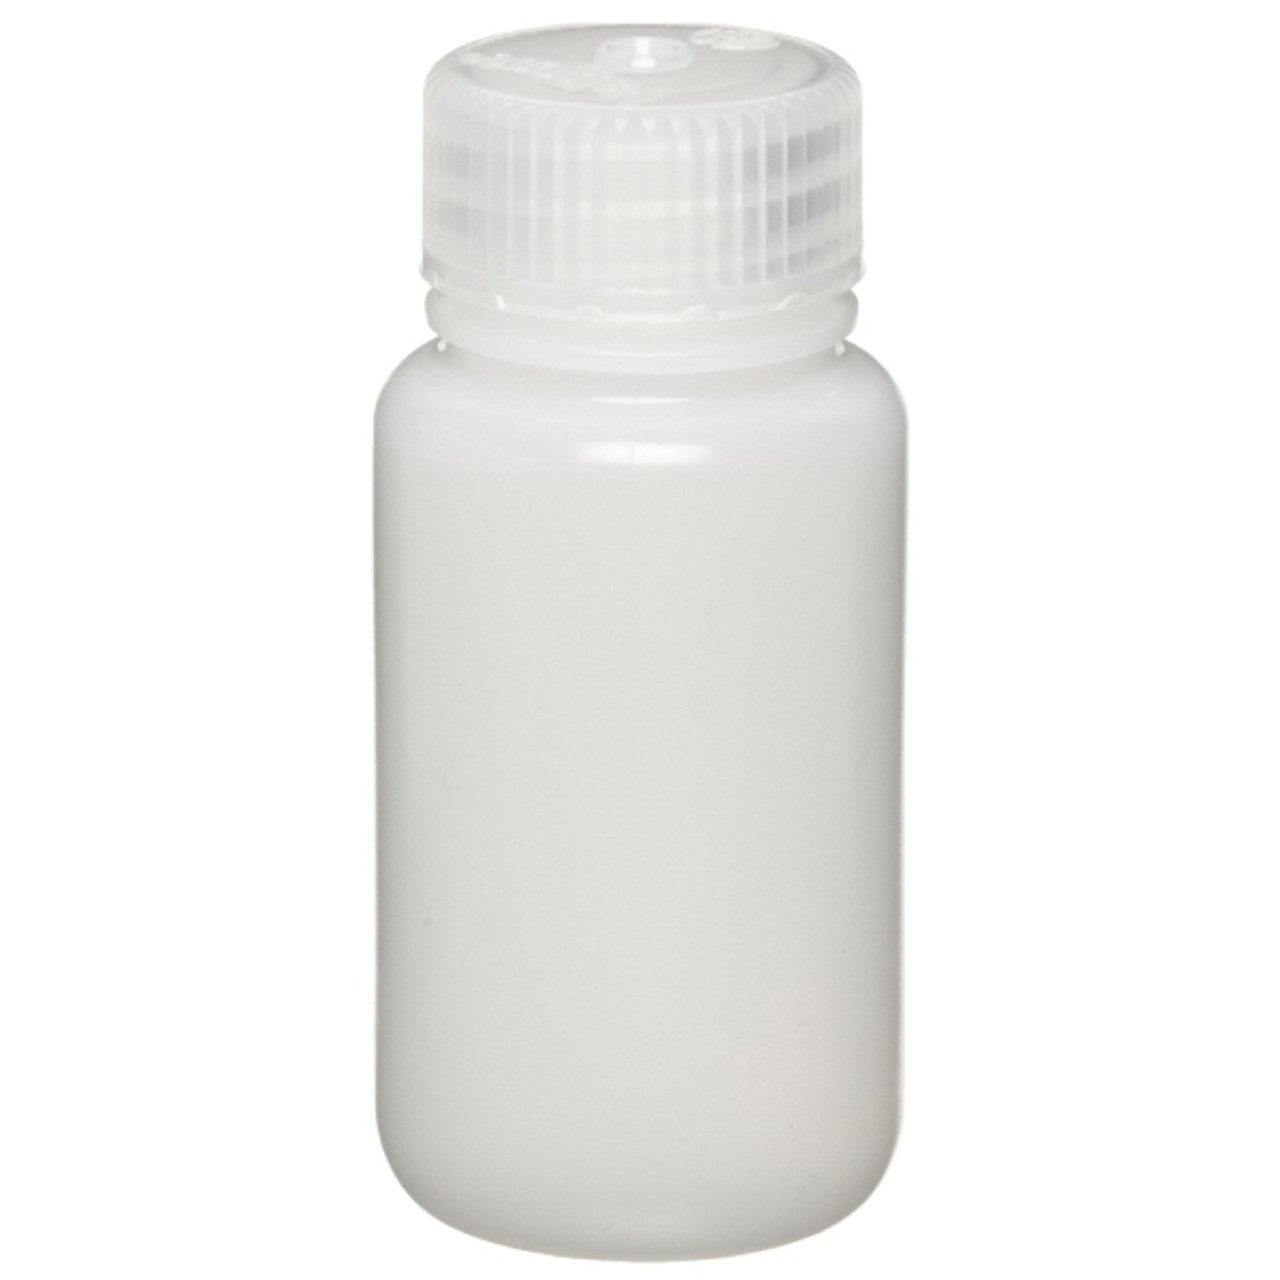 100 Pack 2 oz (60 ml) Clear PET Plastic Spray Bottles with Cap